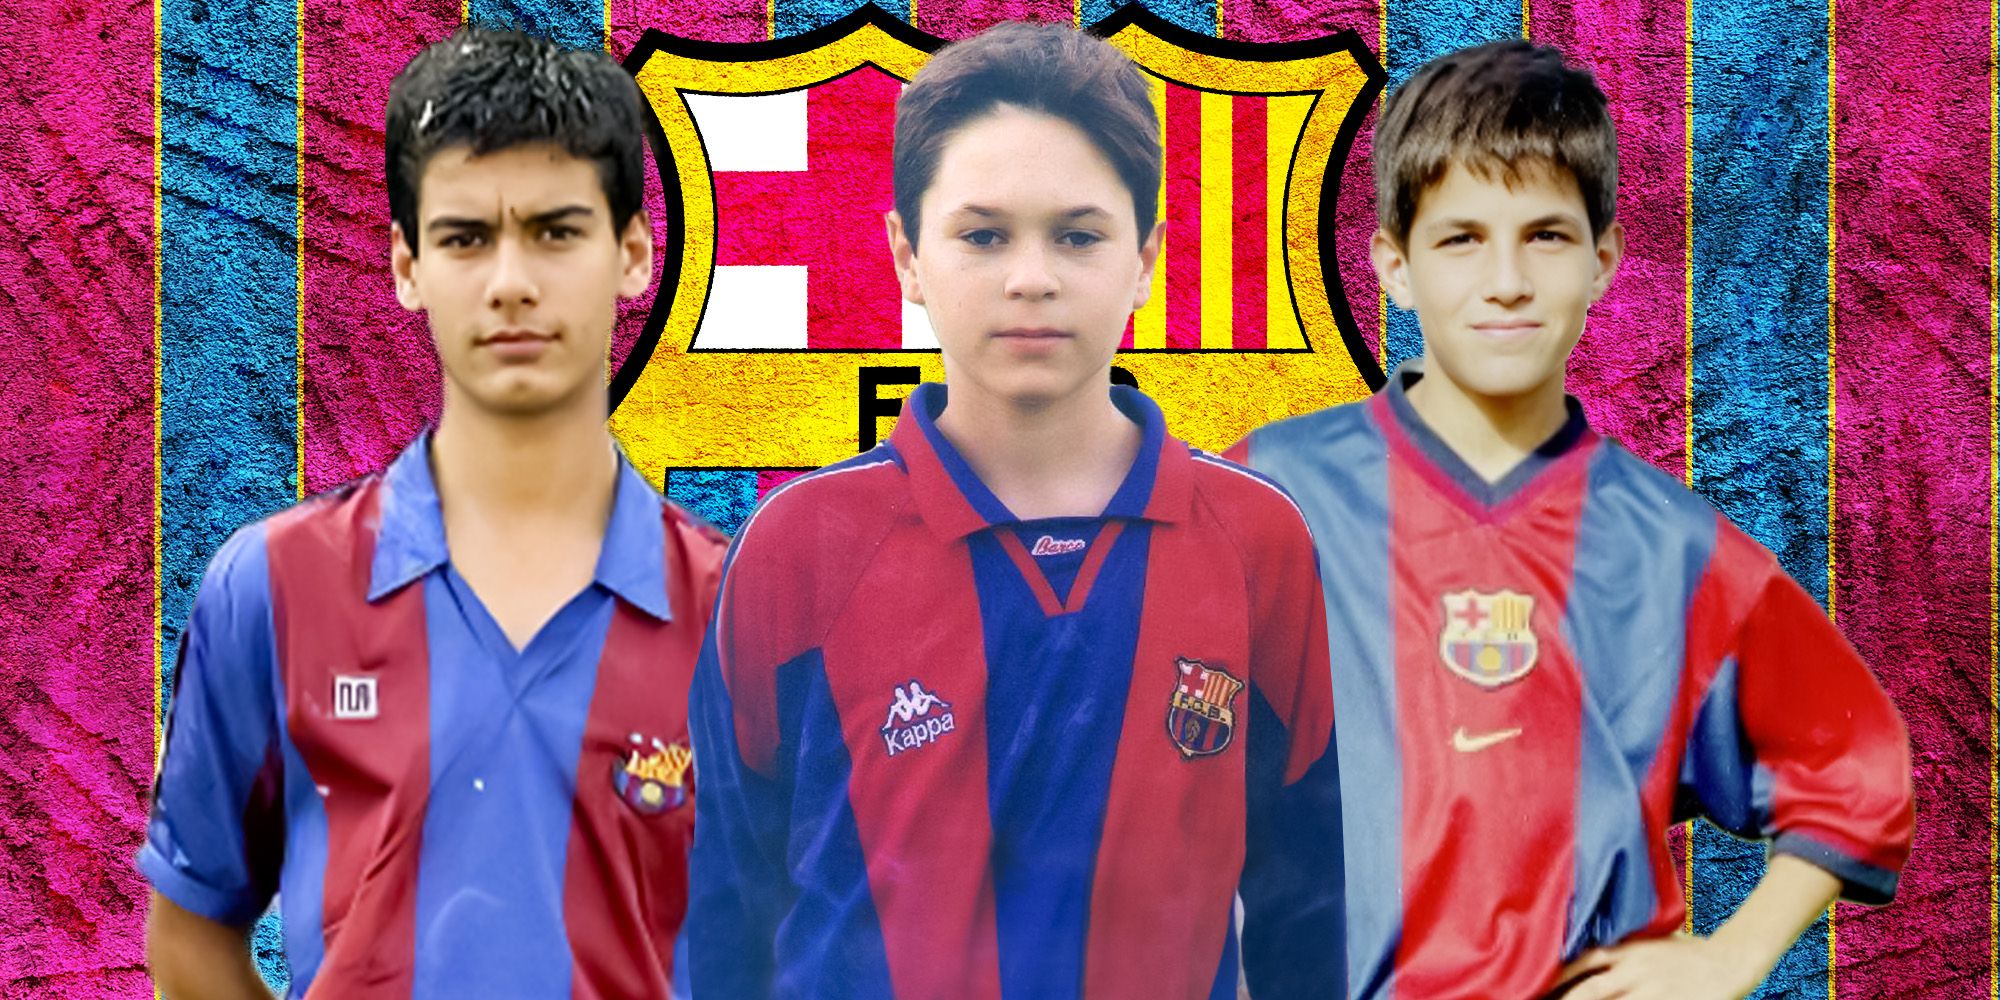 young Pep Guardiola, Andres Iniesta and Cesc Fabregas at Barcelona with the club badge in background